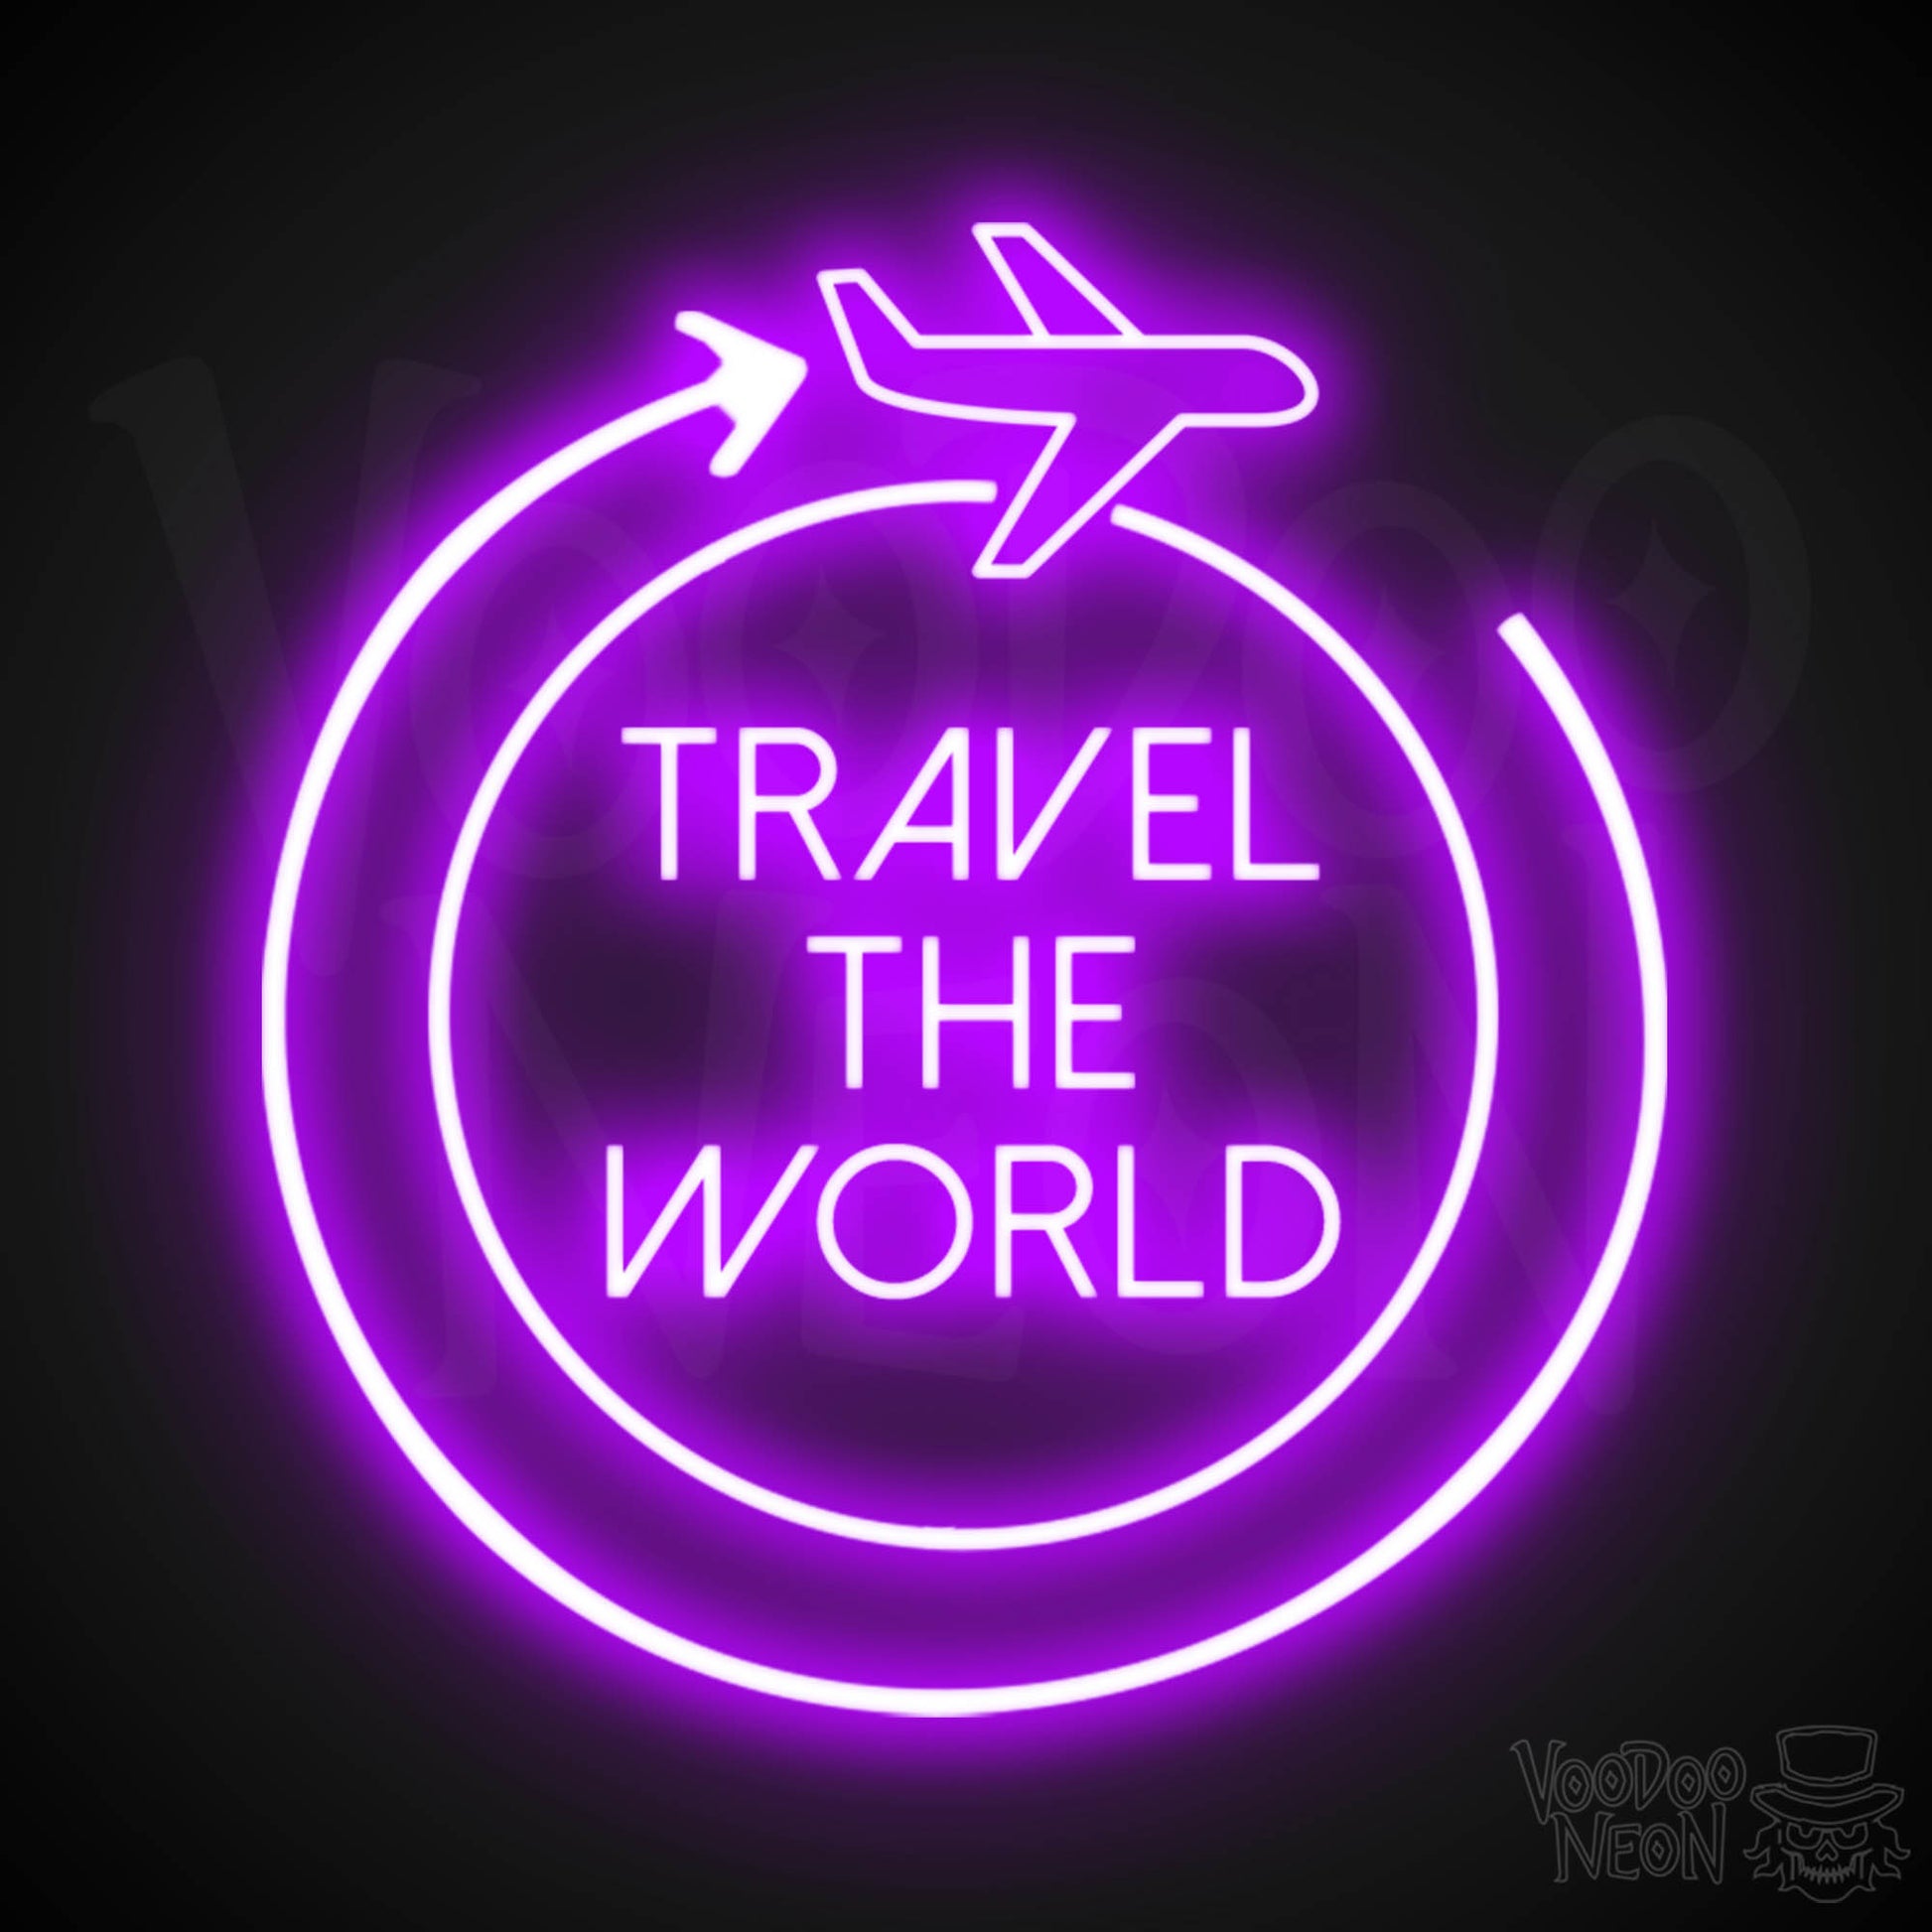 Let's Travel The World Neon Sign - LED Neon Wall Art - Color Purple